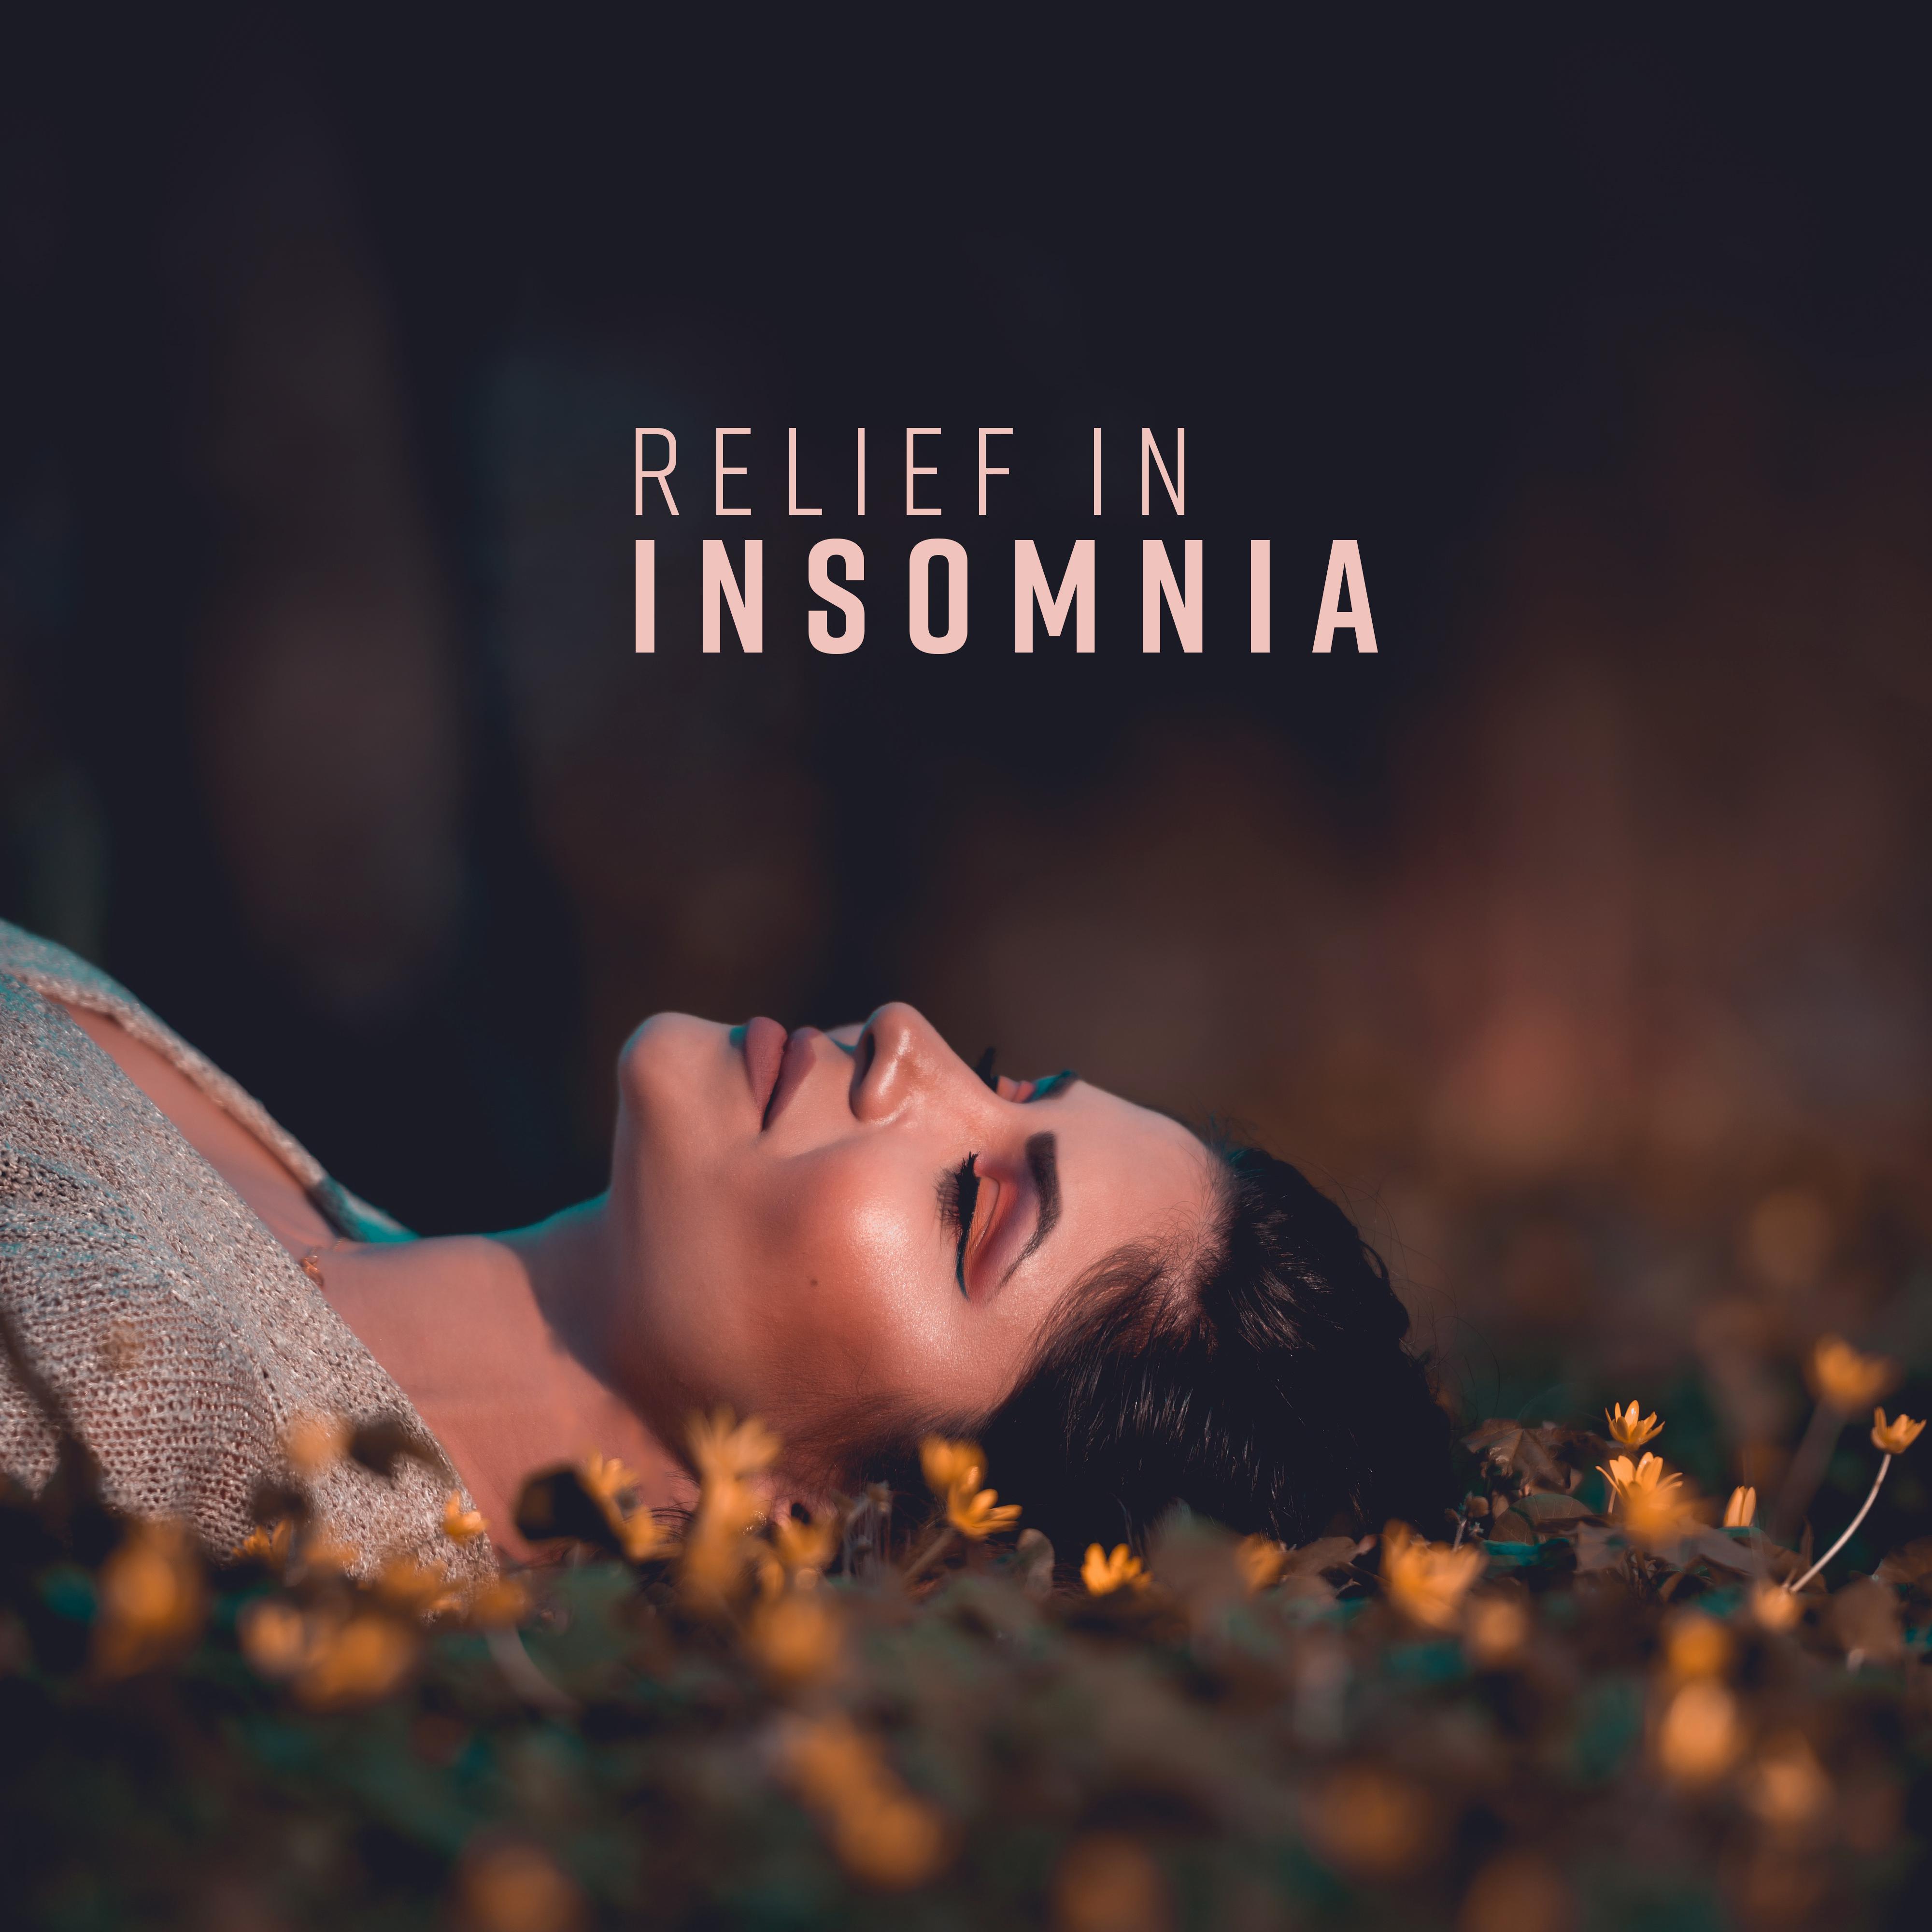 Relief in Insomnia: 15 Sleepy Melodies to Fall Asleep, Nap and Siesta